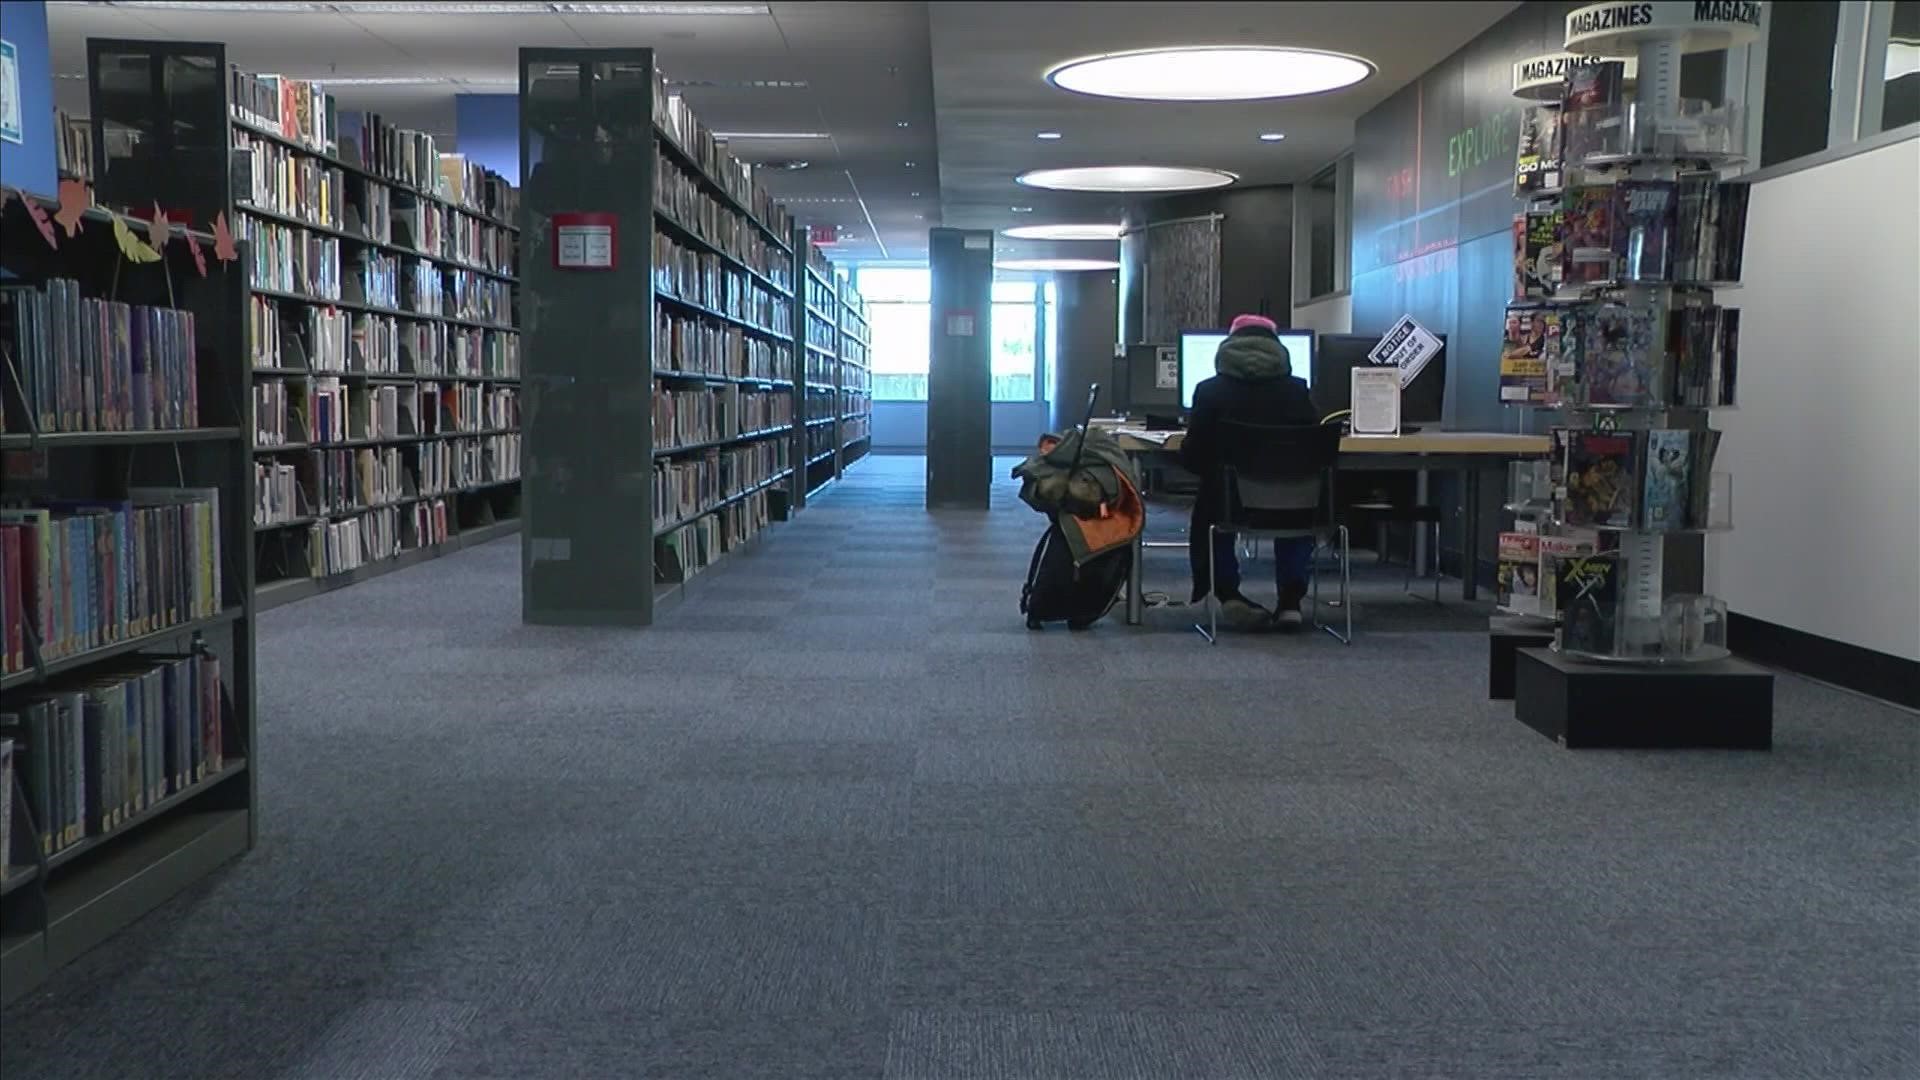 Did you know the Memphis Public Library is one of the most innovative in the country? ABC24 Visual Storyteller Patrick Niedzwiedz took a look.